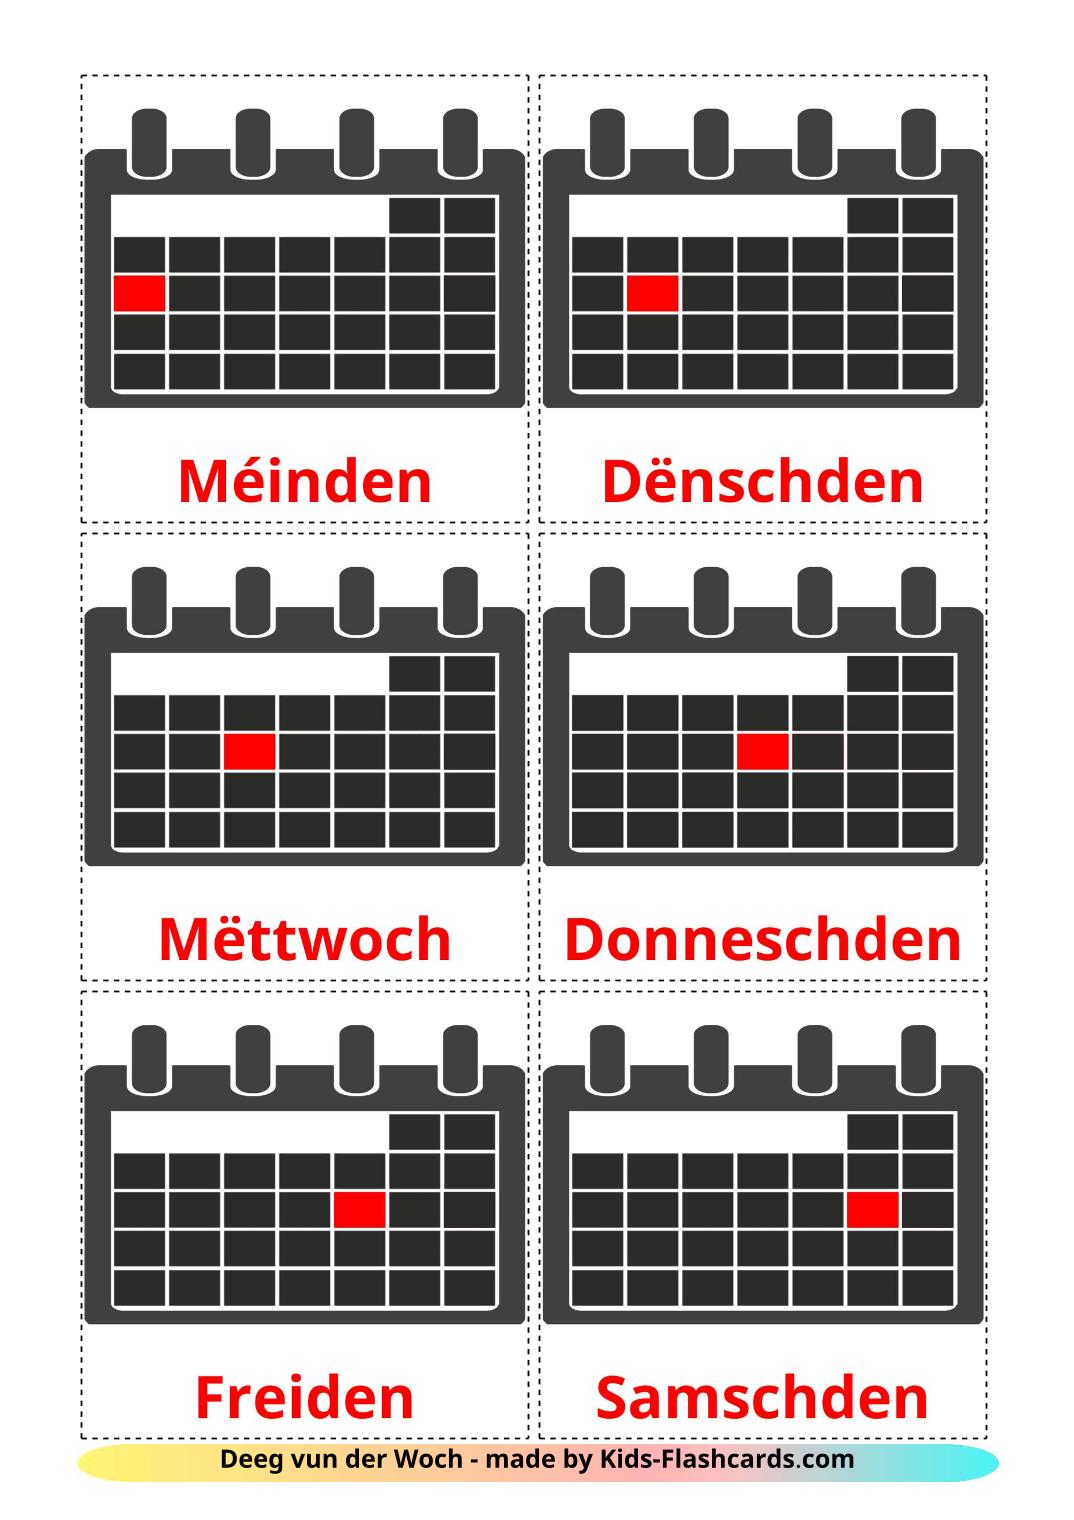 Days of Week - 12 Free Printable luxembourgish Flashcards 